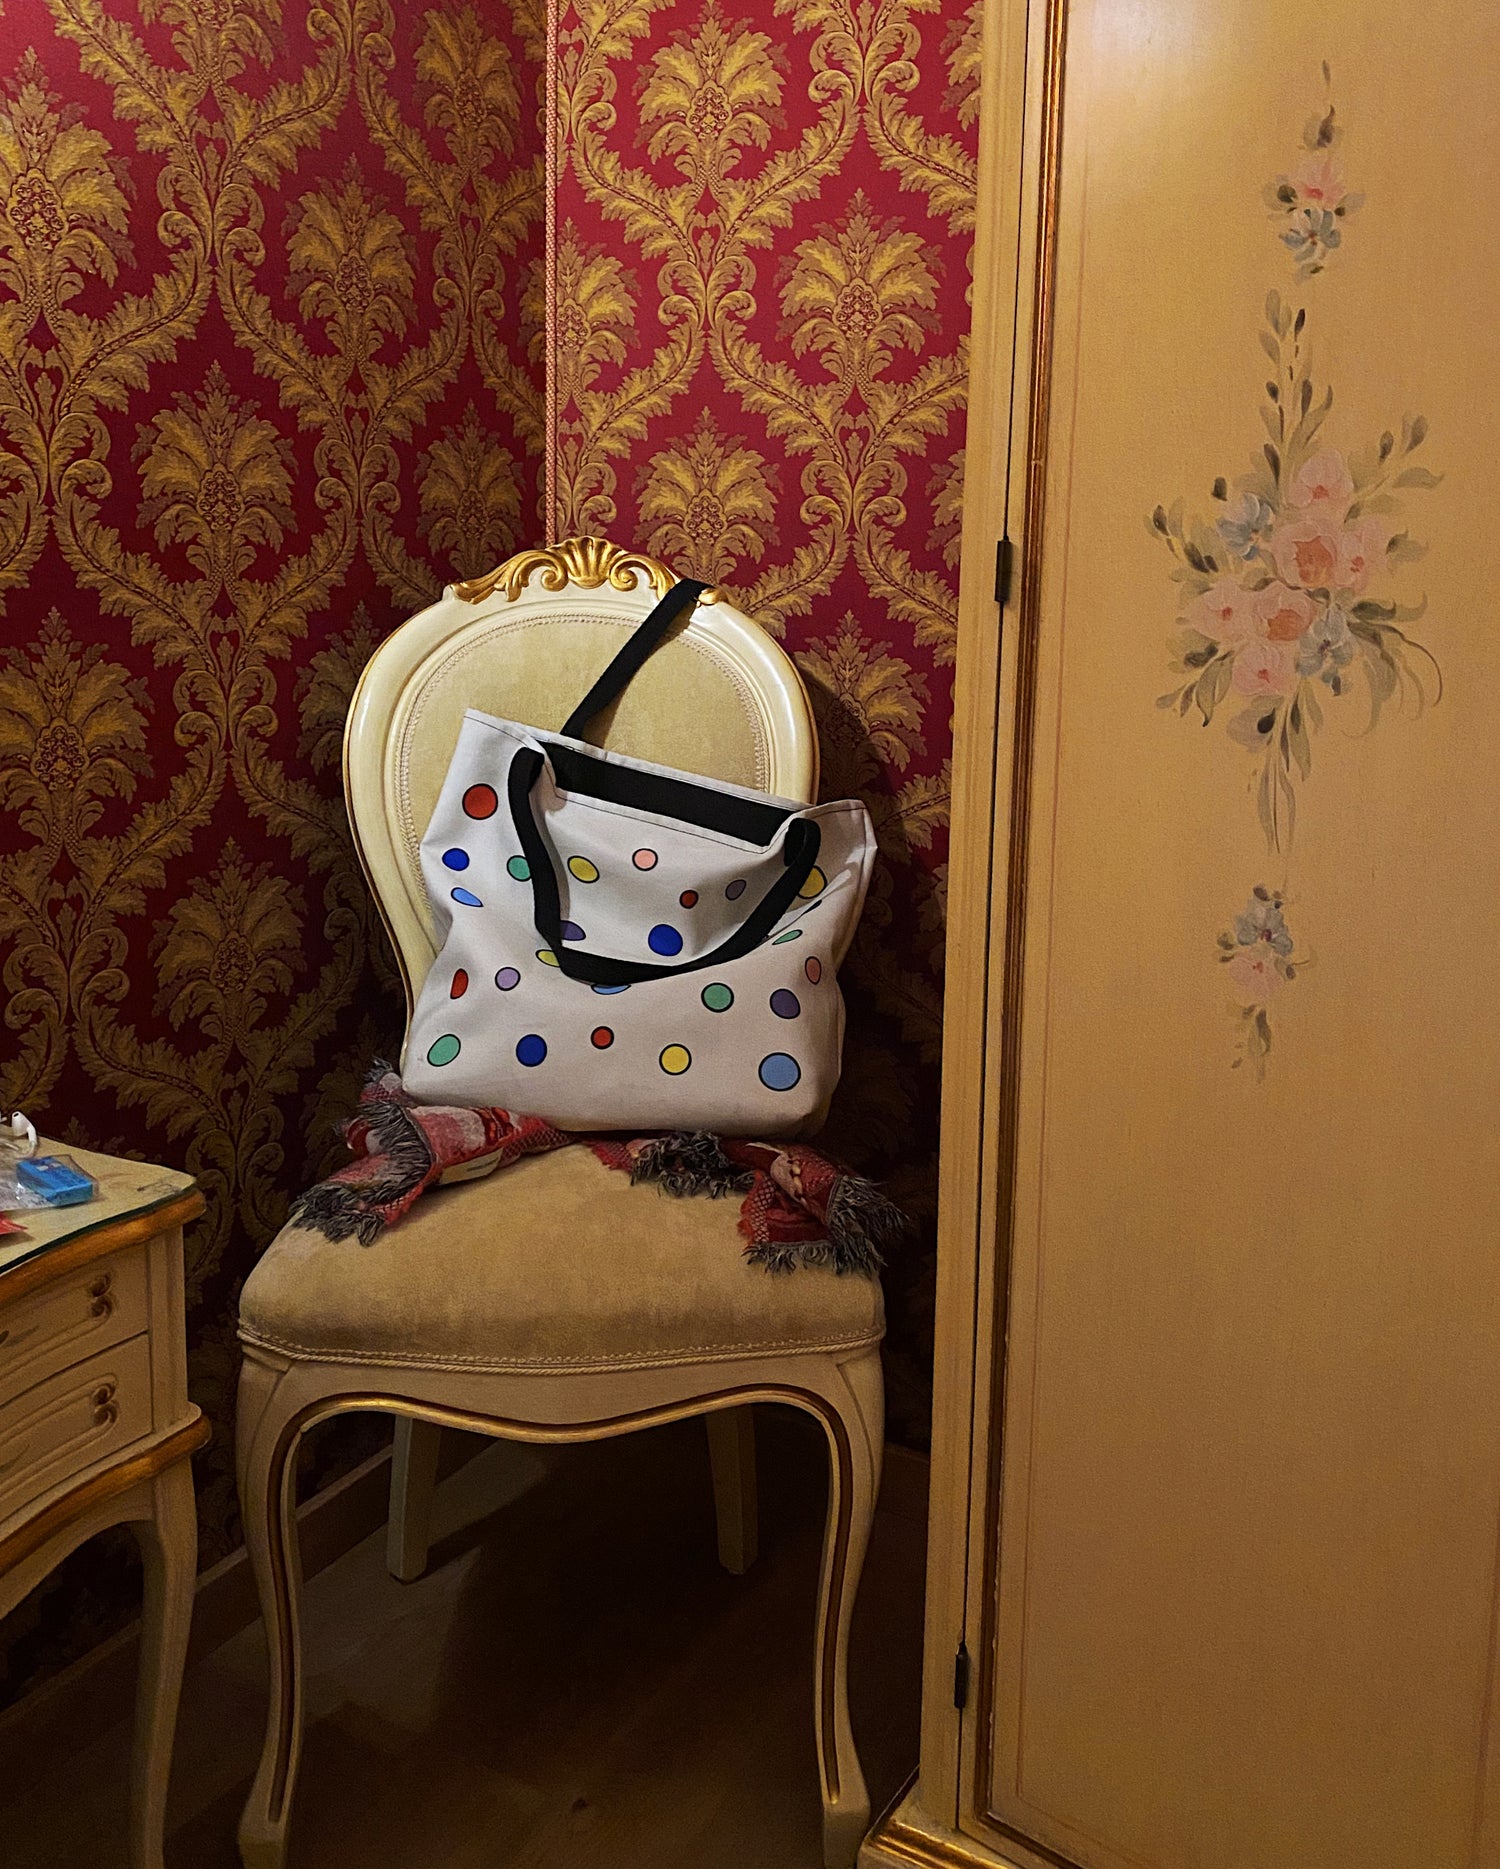 a colorfully polka-dotted cream colored tote bag sits slouched in an antique chair next to a hand-painted antique wardrobe in a richly wallpapered burgundy hotel room in Italy.